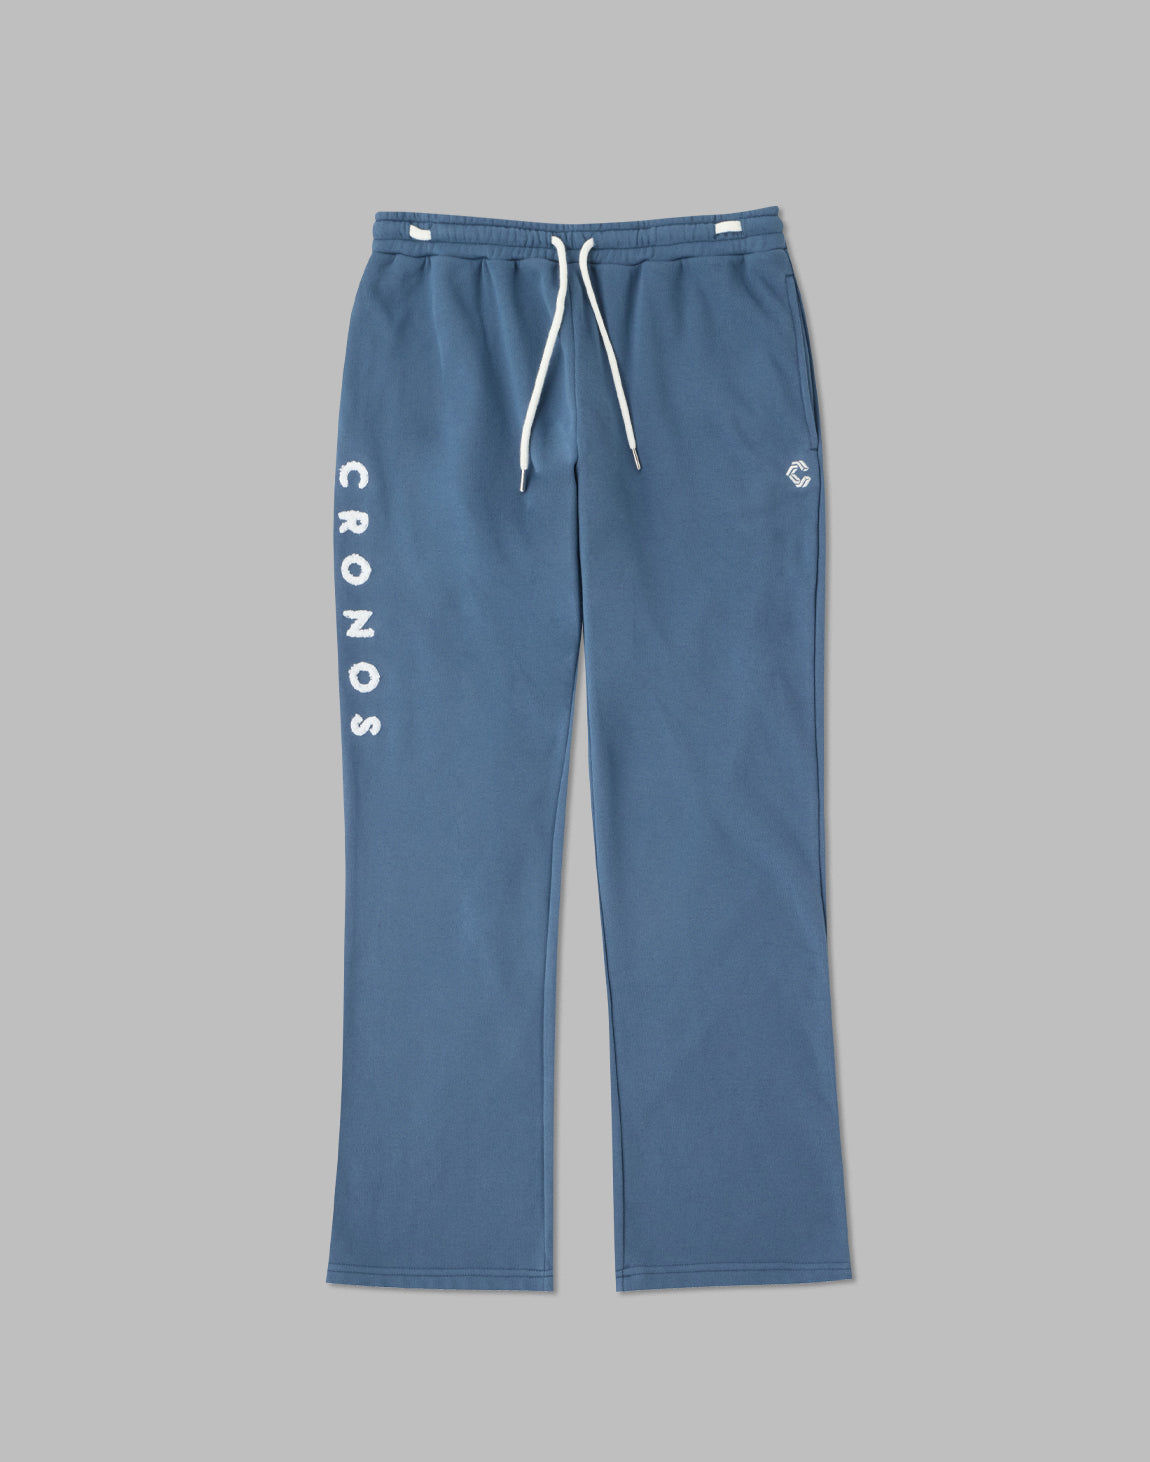 CRONOS ROOM LOGO EMBROIDERY PANTS – クロノス CRONOS Official Store